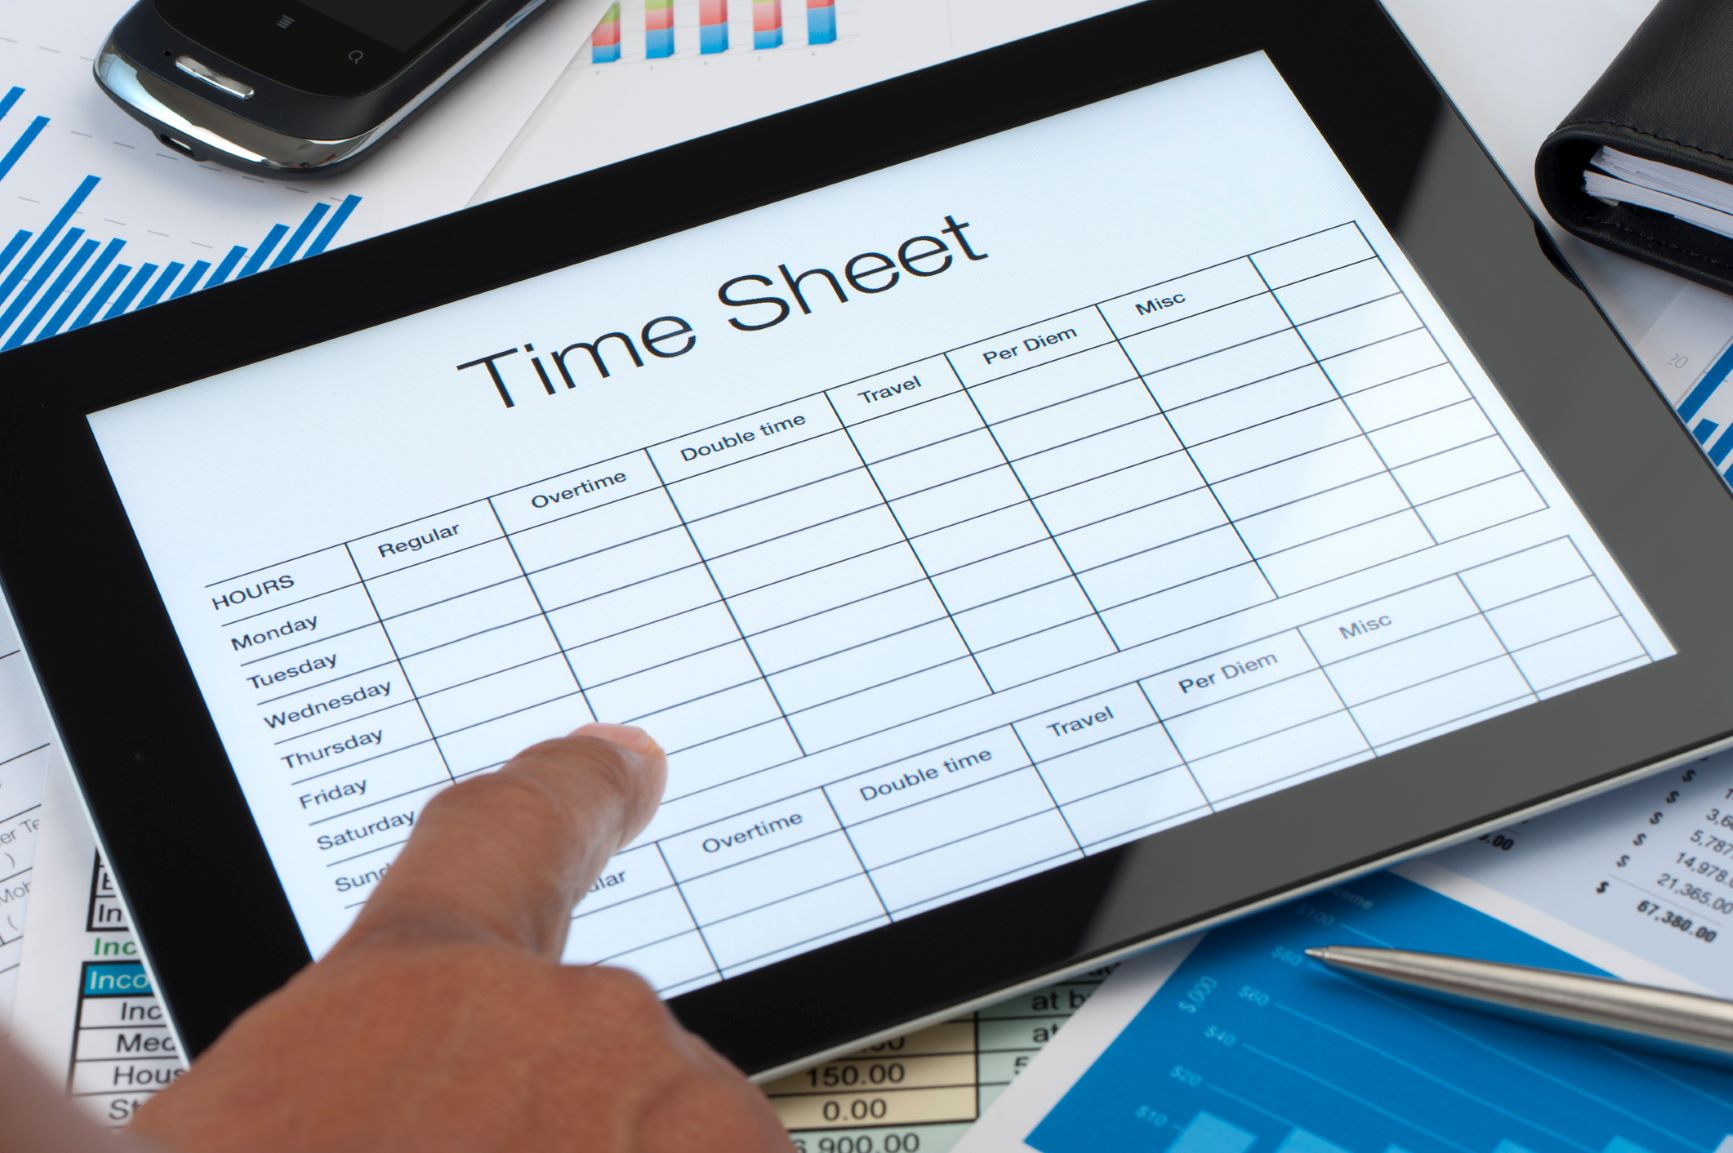 Man pointing to a timesheet image on an iPad